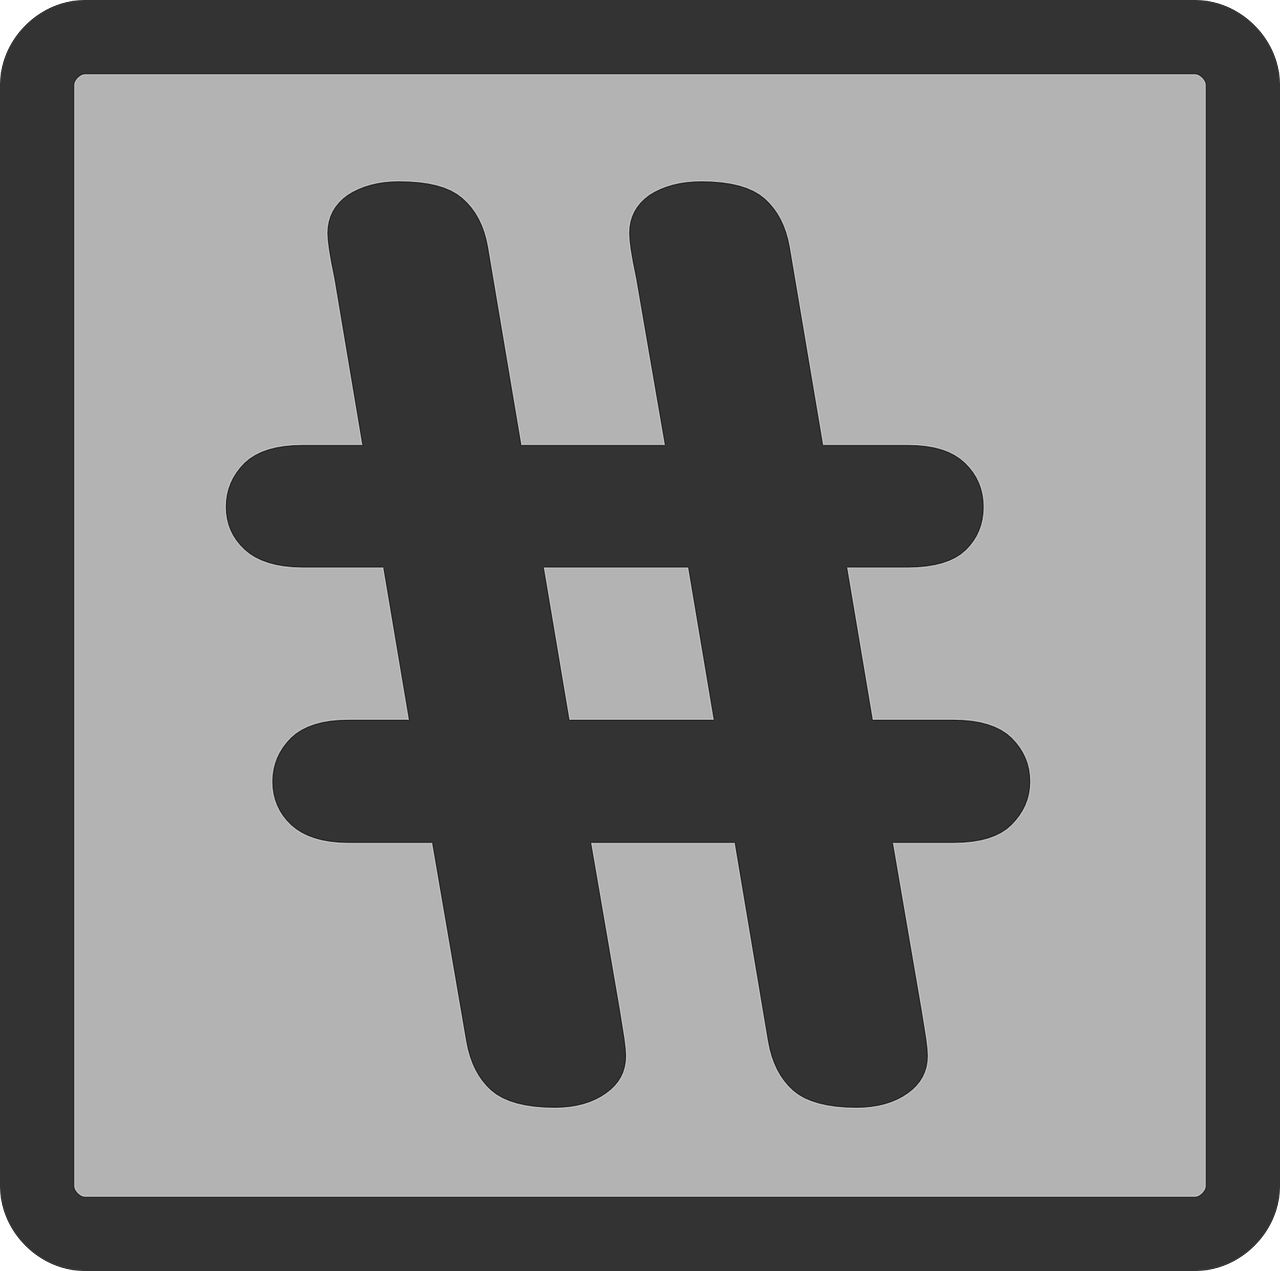 hashtag,box,frame,grey,square,black,border,gate,free vector graphics,free pictures, free photos, free images, royalty free, free illustrations, public domain